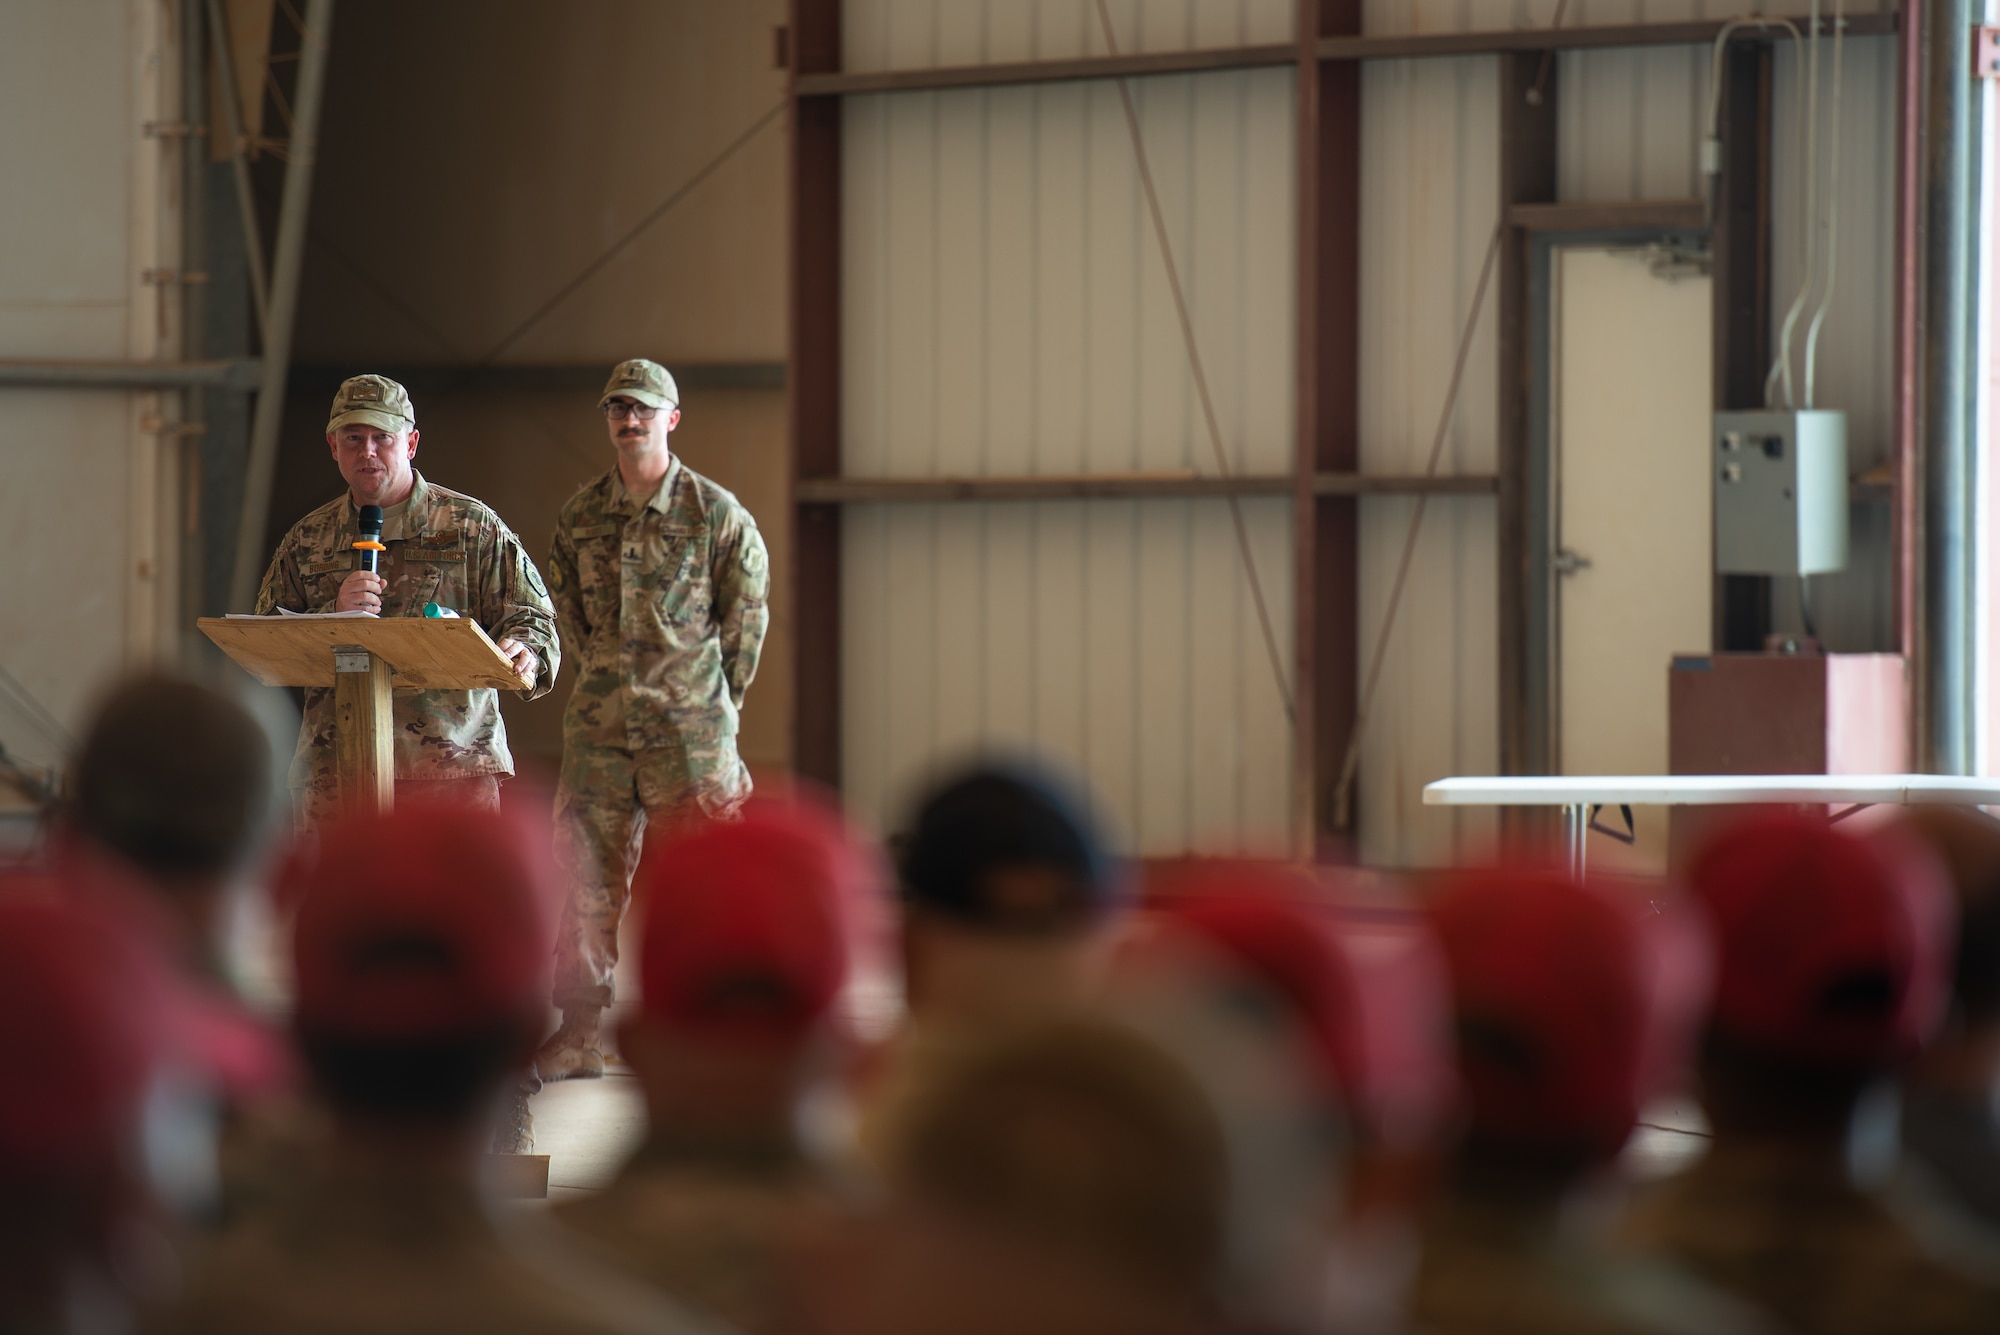 U.S. Air Force Col. Steven P. Bording, former 409th Air Expeditionary Group commander, gives a final speech during the group change of command ceremony at Air Base 201, Niger, June 28, 2019. The change of command ceremony is a tradition that dates back to the 18th century. (U.S. Air Force photo by Staff Sgt. Devin Boyer)